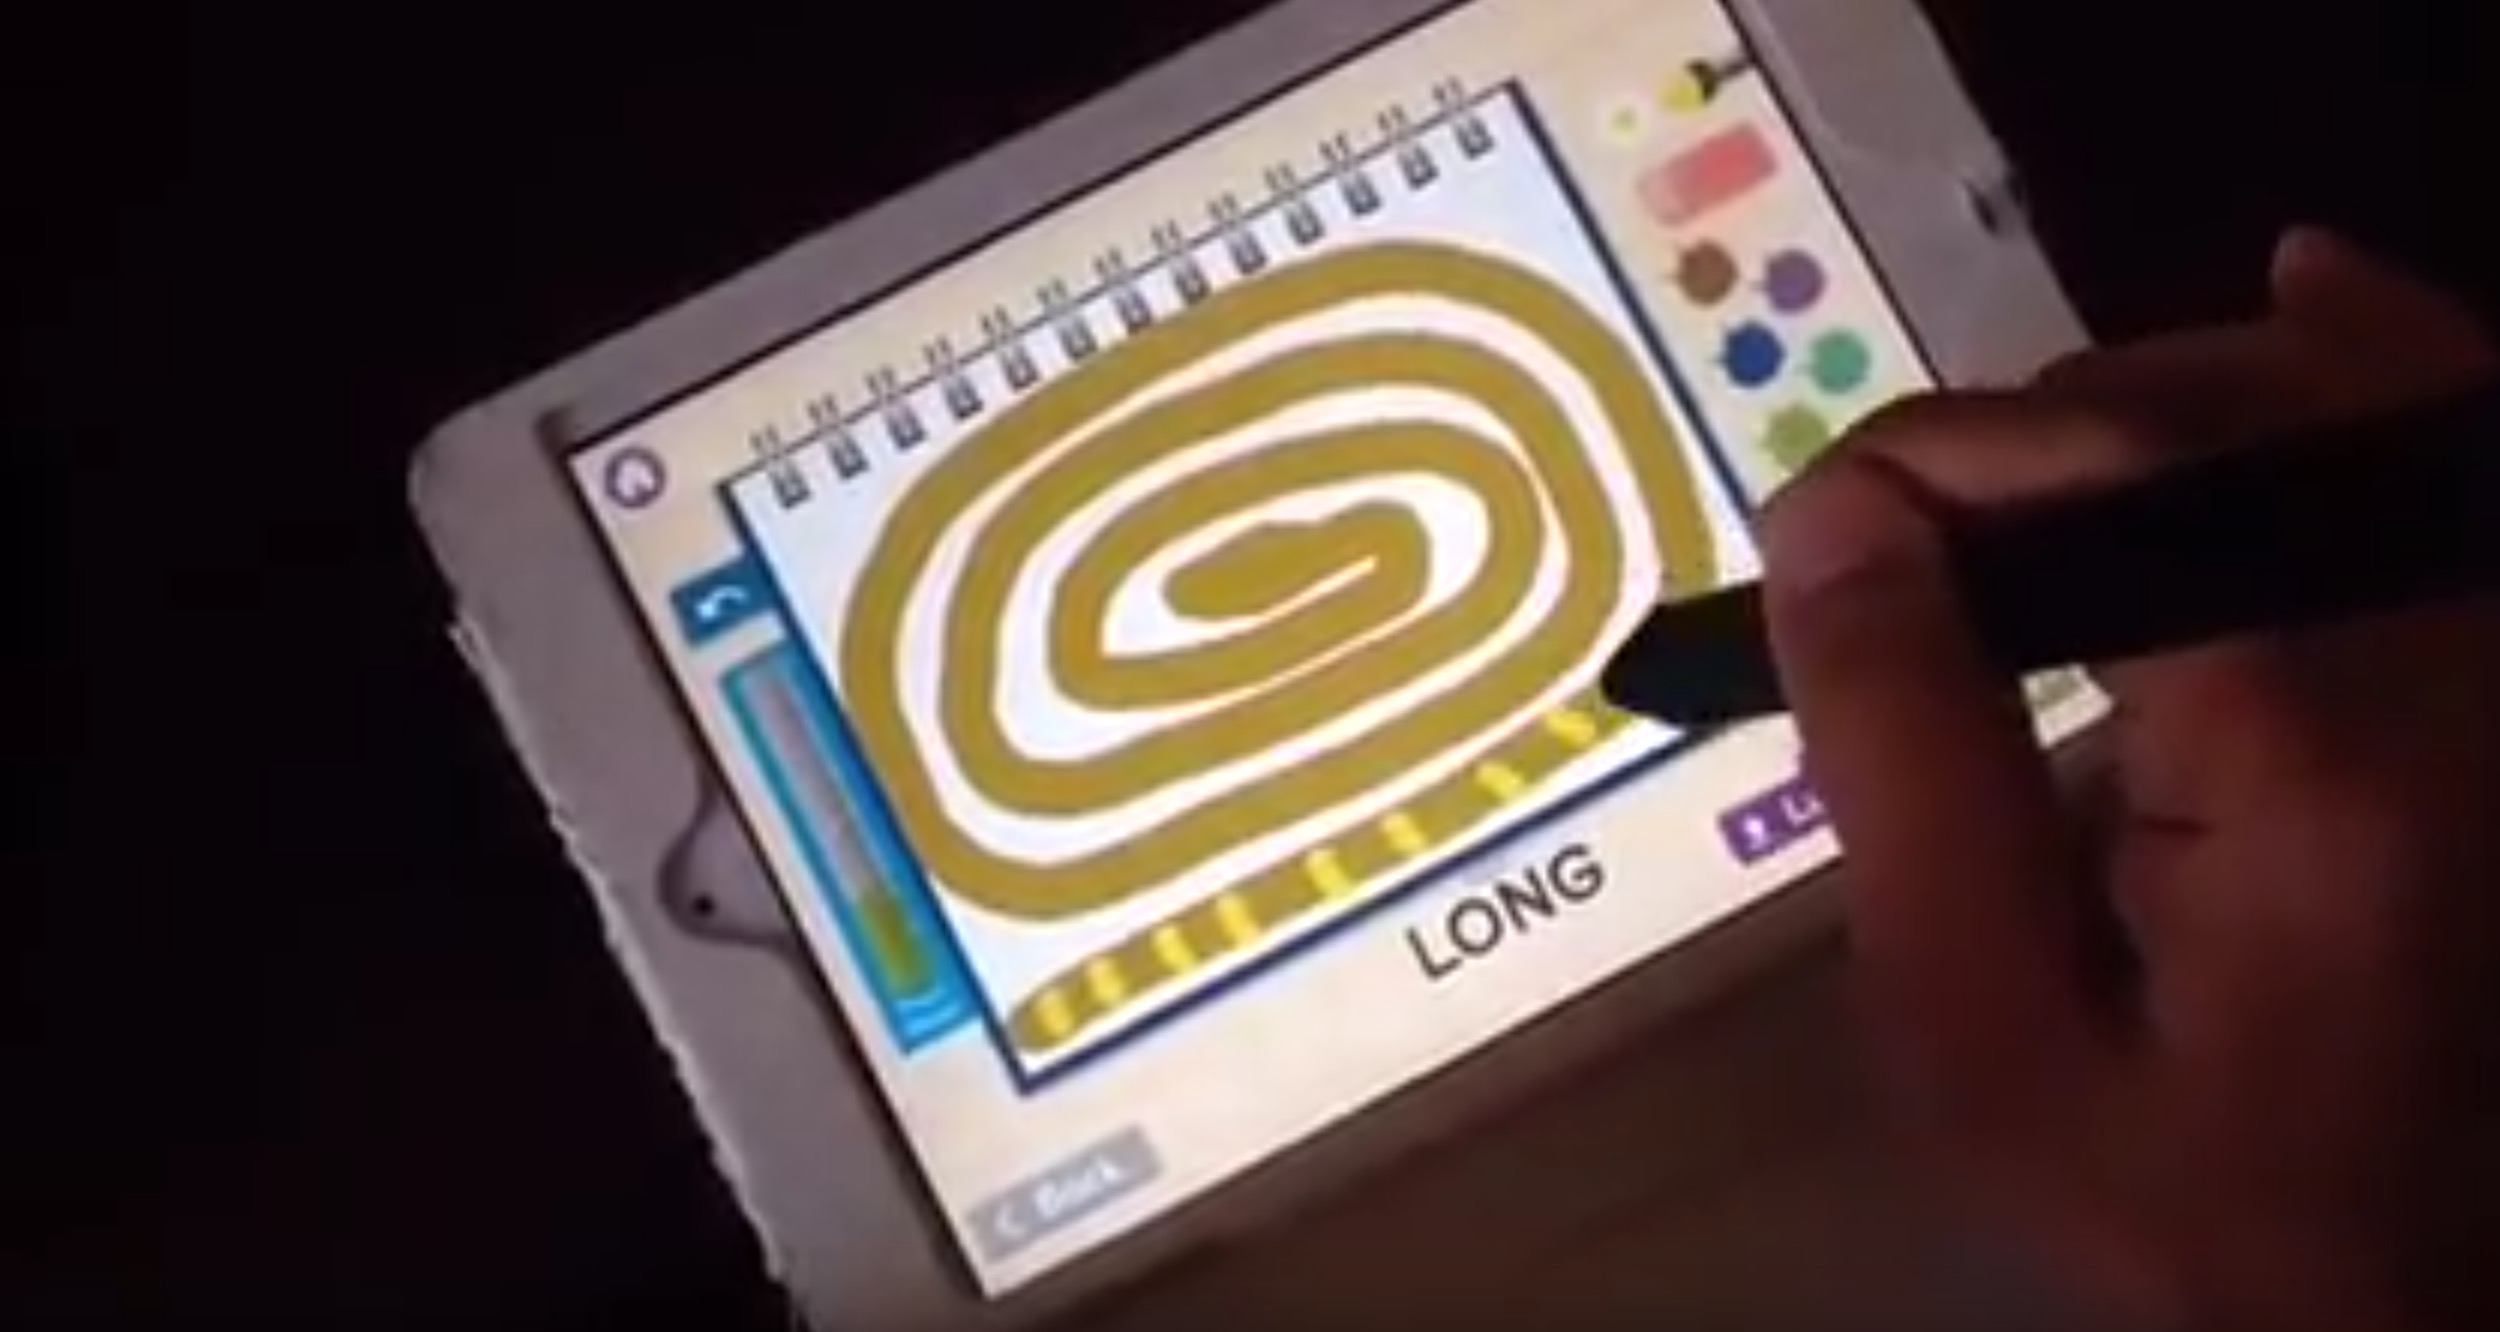 A photo of a hand holding a pen and drawing a snake figure on a tablet.